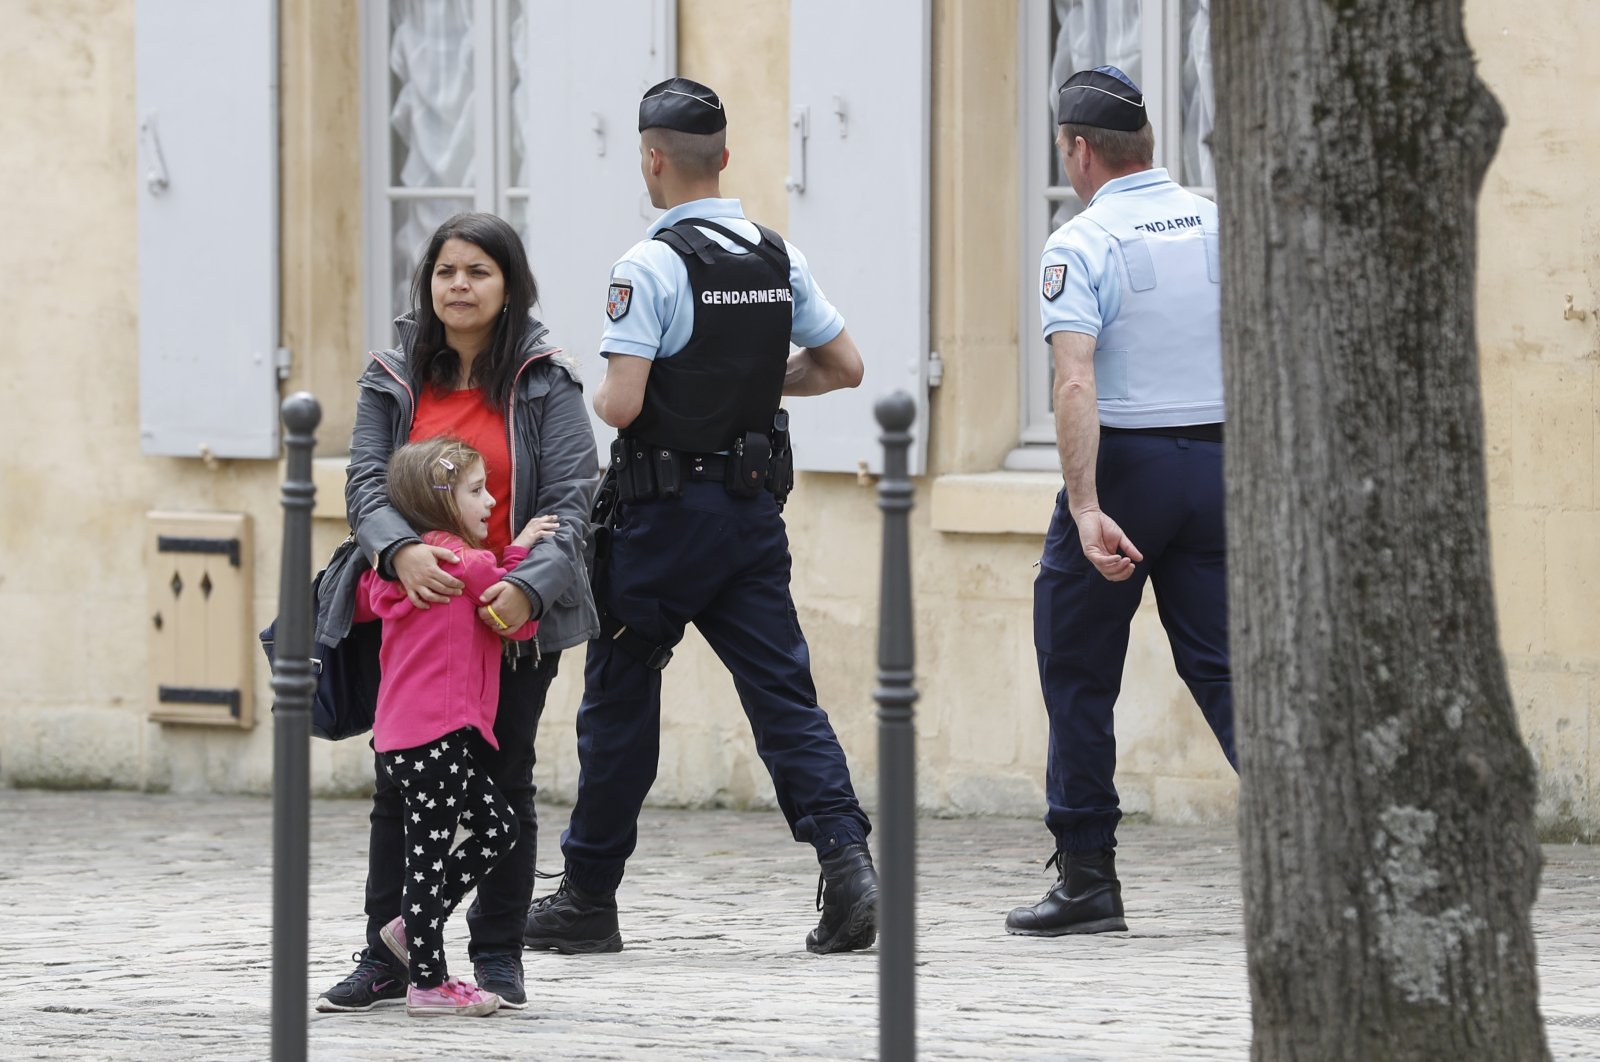 Police Officers patrol as a woman stands with a child in Chantilly, France in this undated picture. (Reuters Photo)
